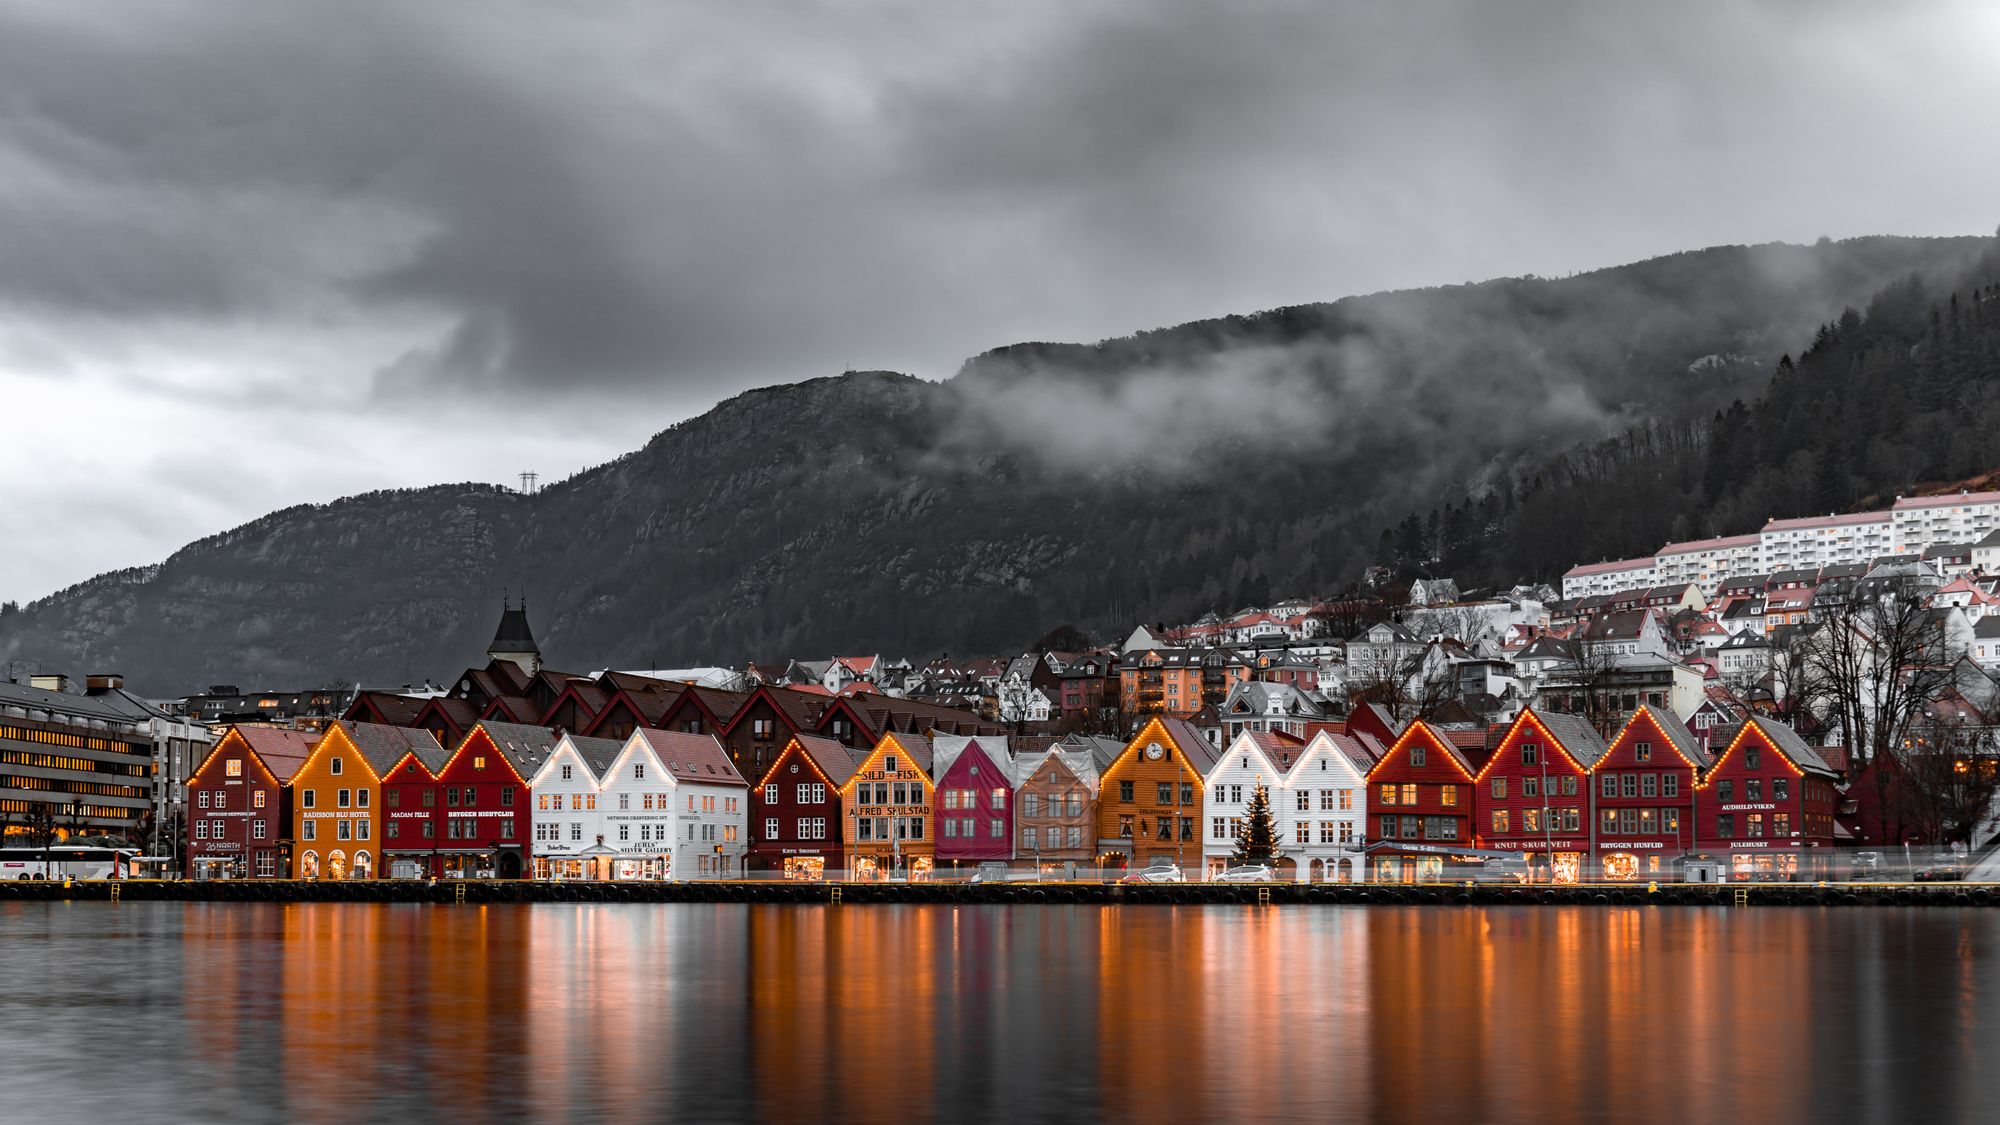 A row of houses on a fjord in Norway